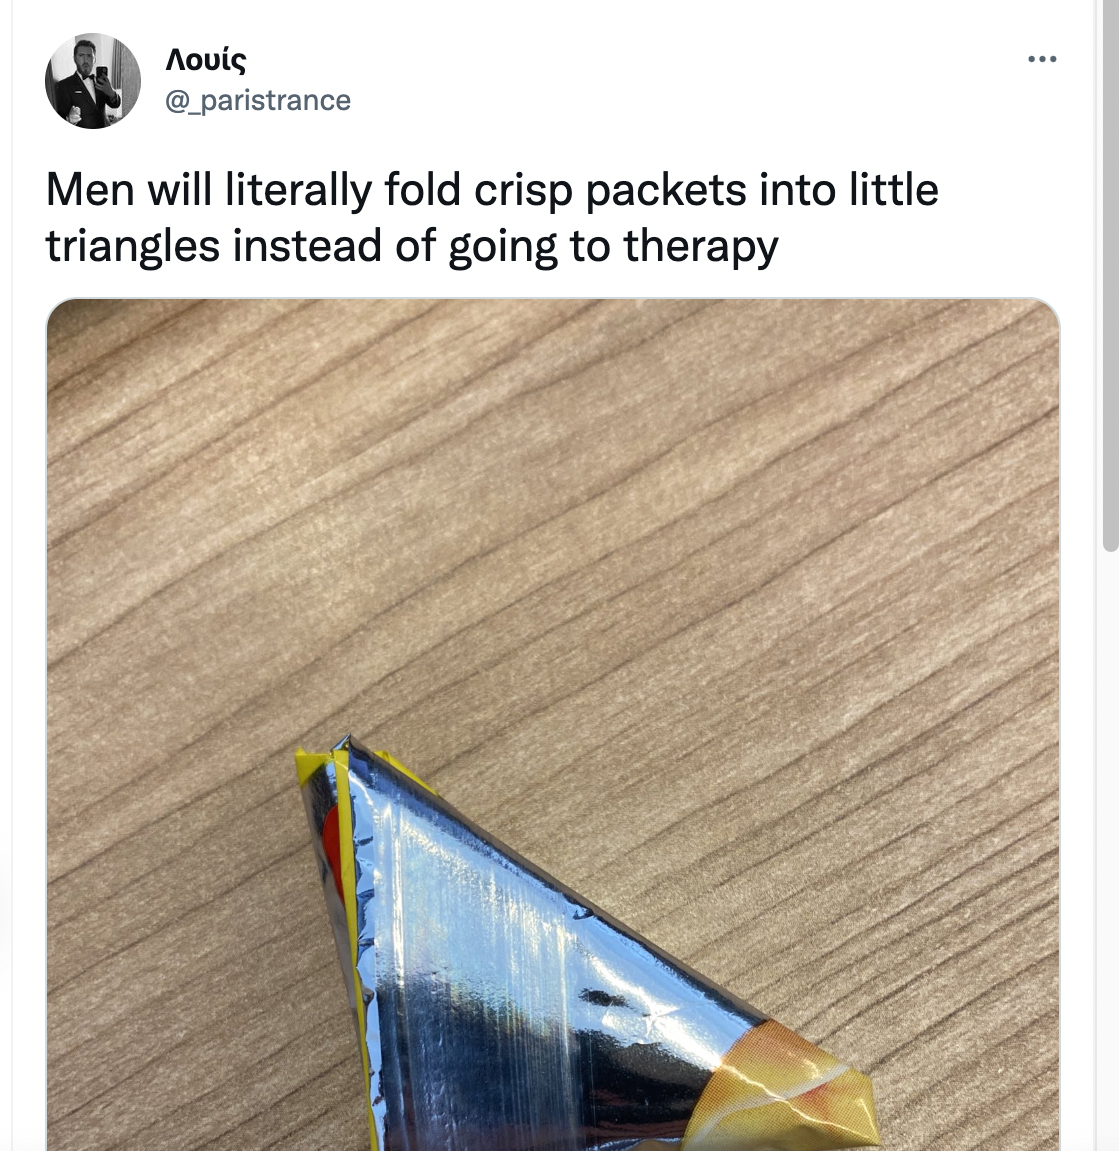 Things men do instead of going to therapy - wood - Men will literally fold crisp packets into little triangles instead of going to therapy www